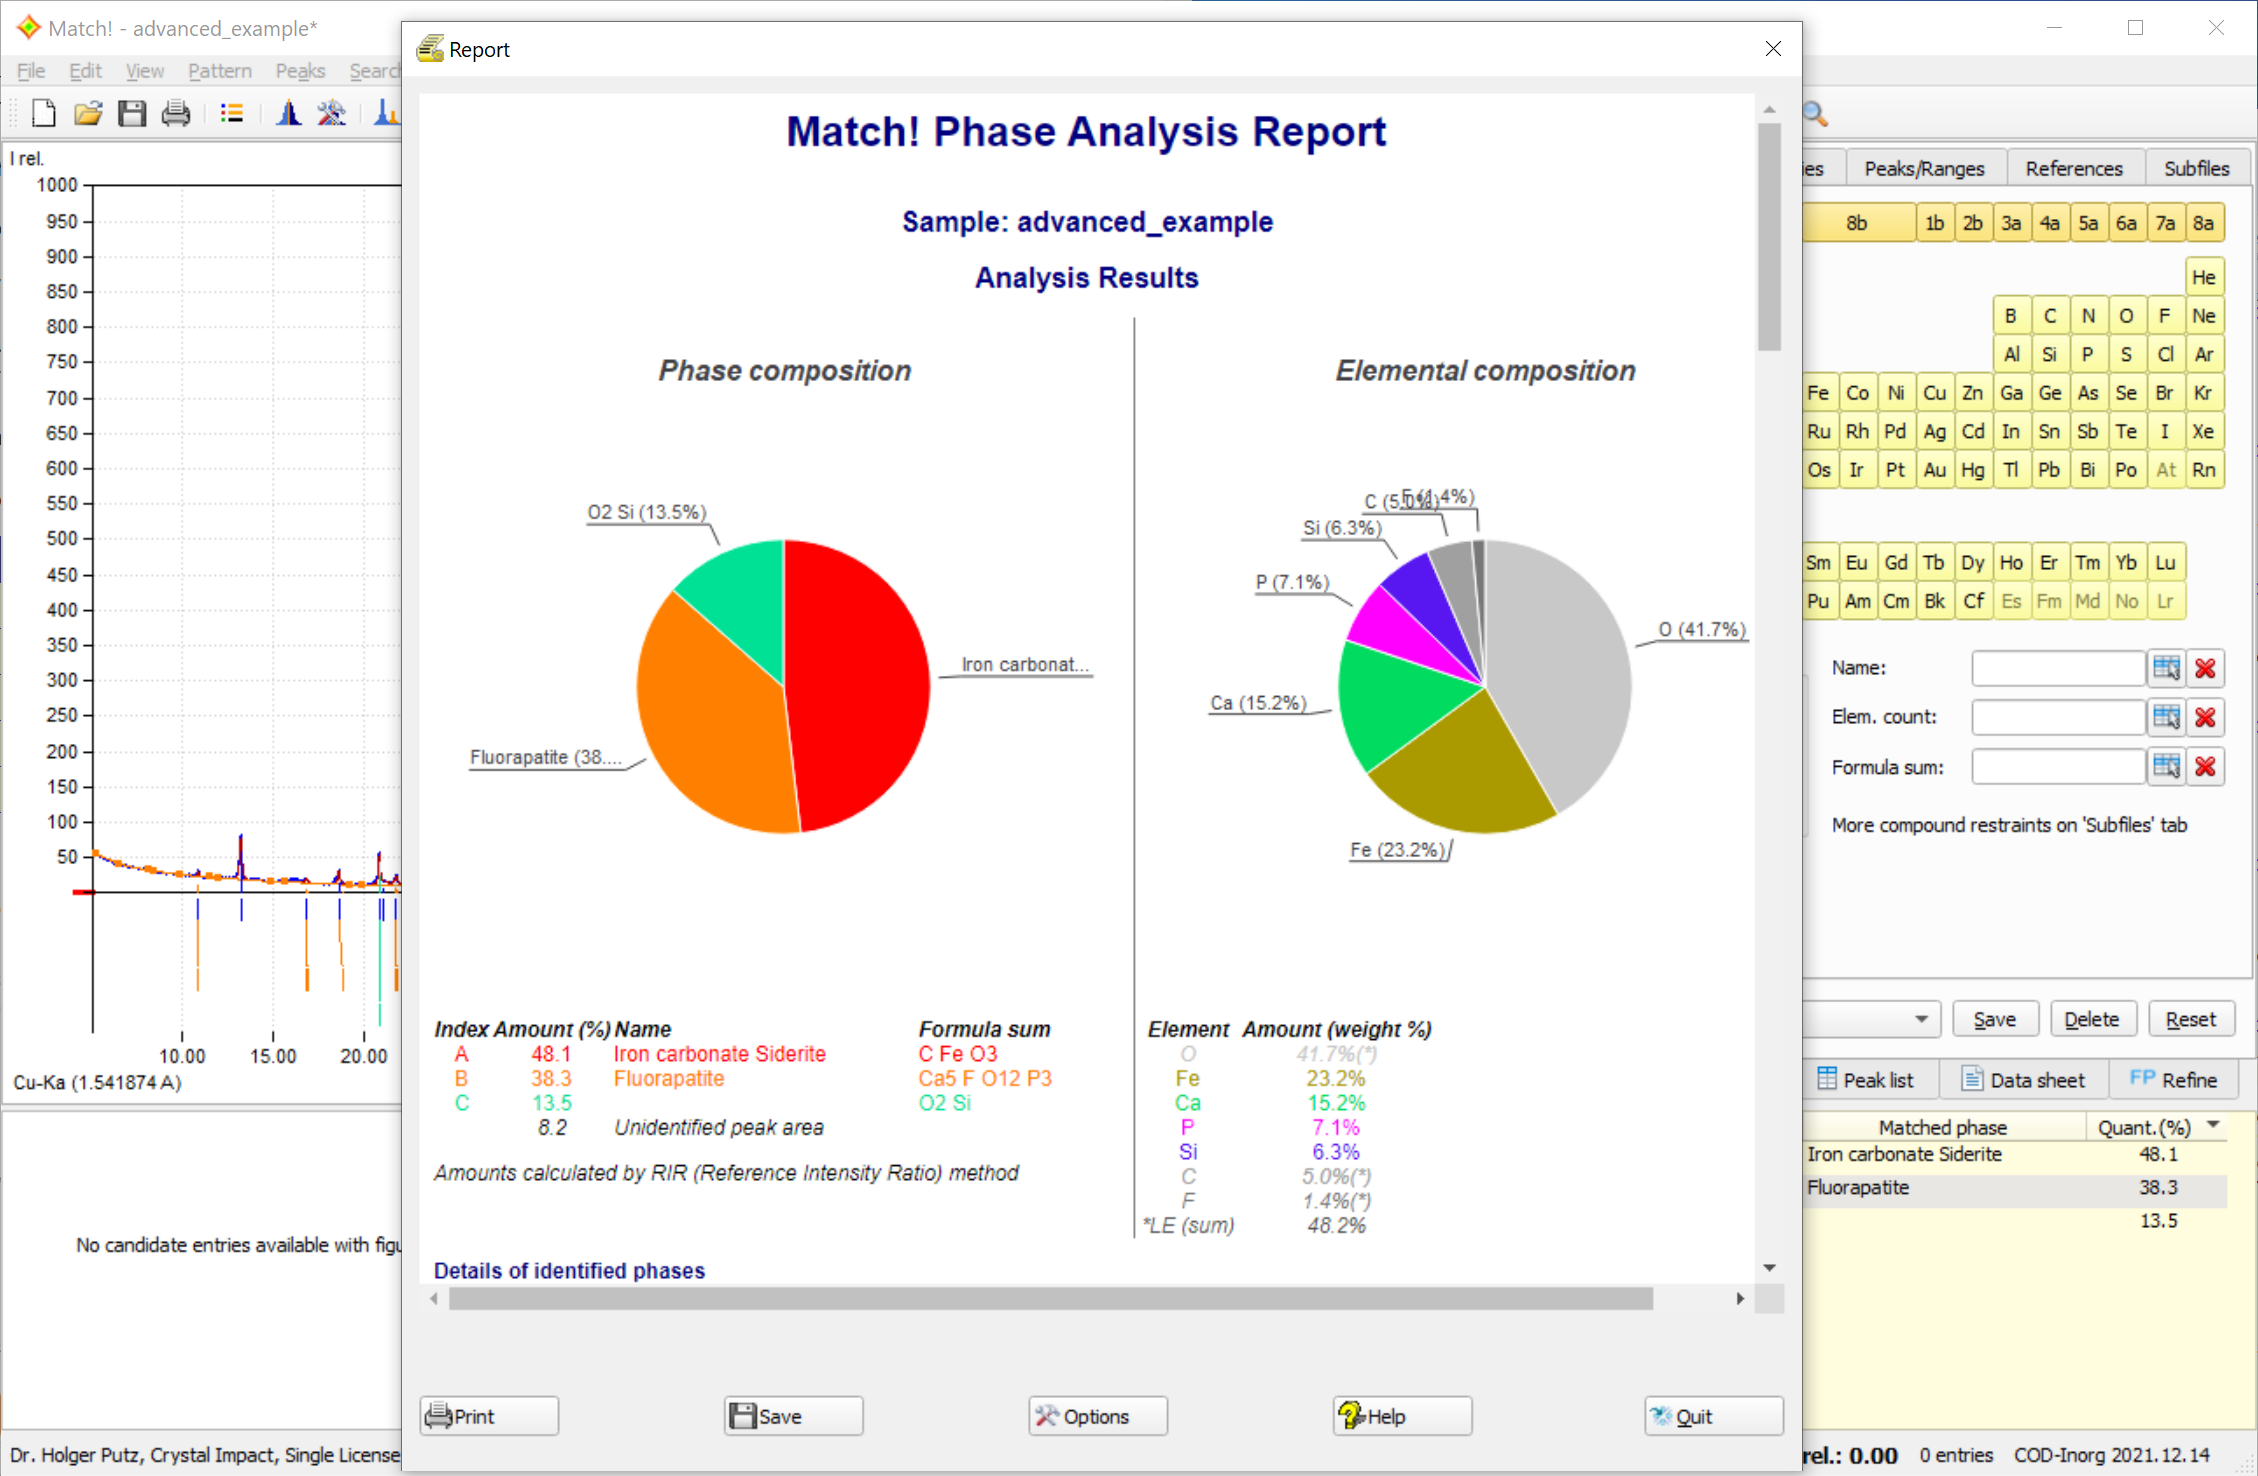 Screenshot of Match! with Pie Charts